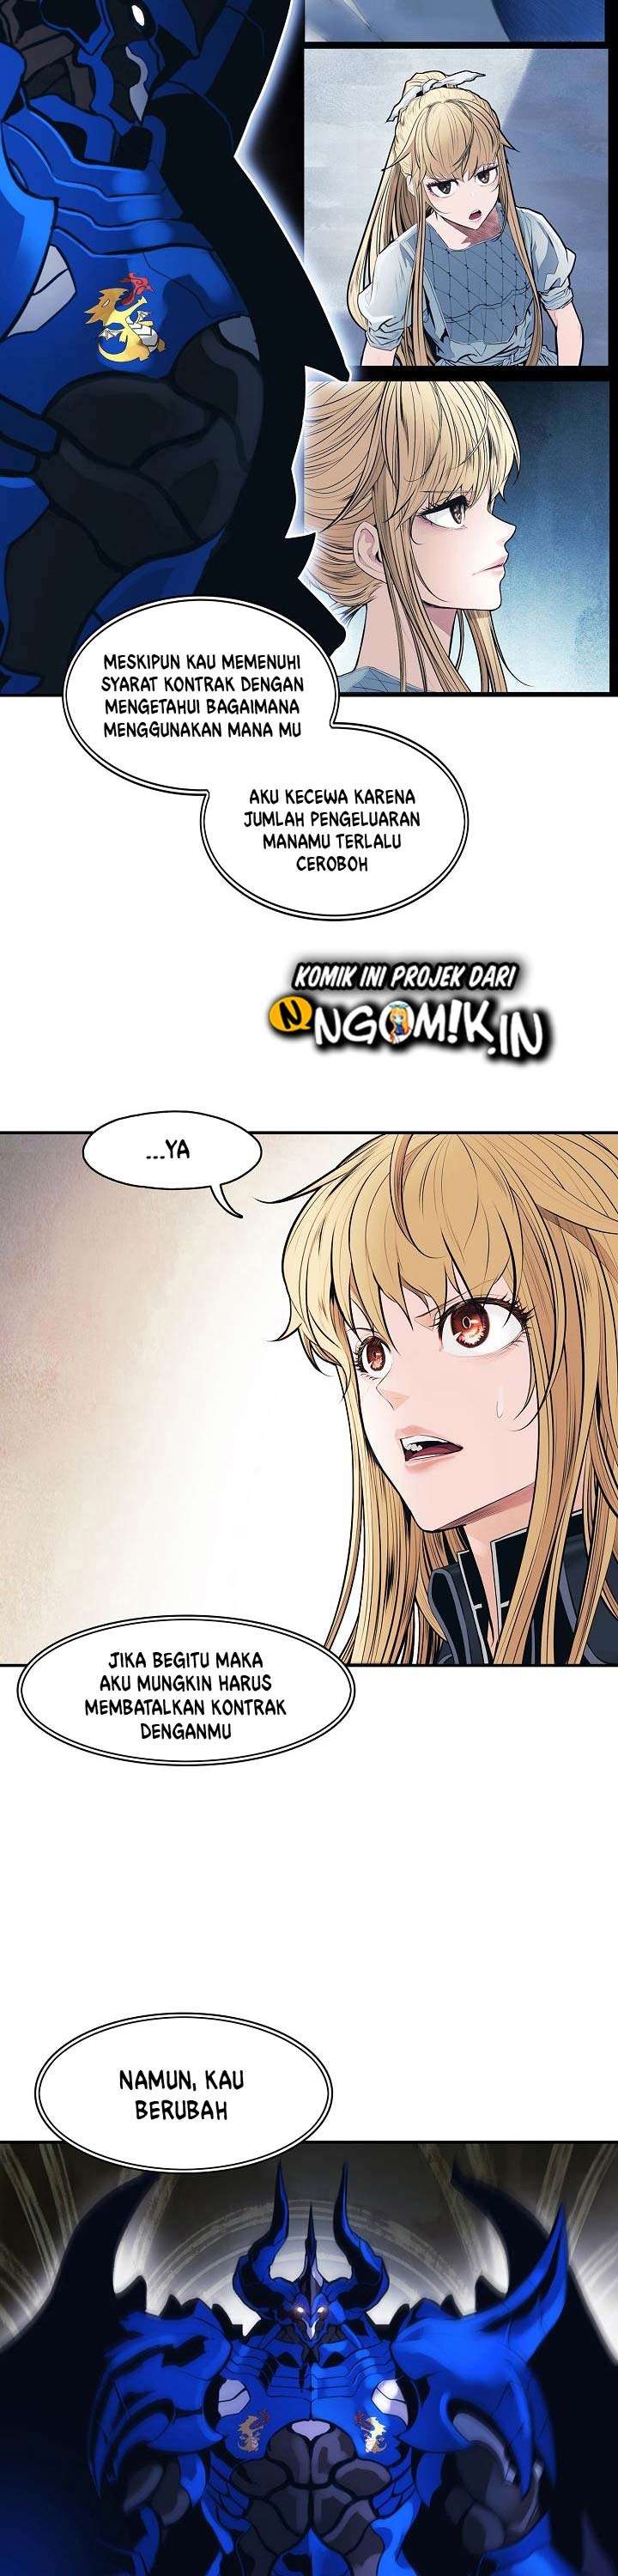 MookHyang – Dark Lady Chapter 75